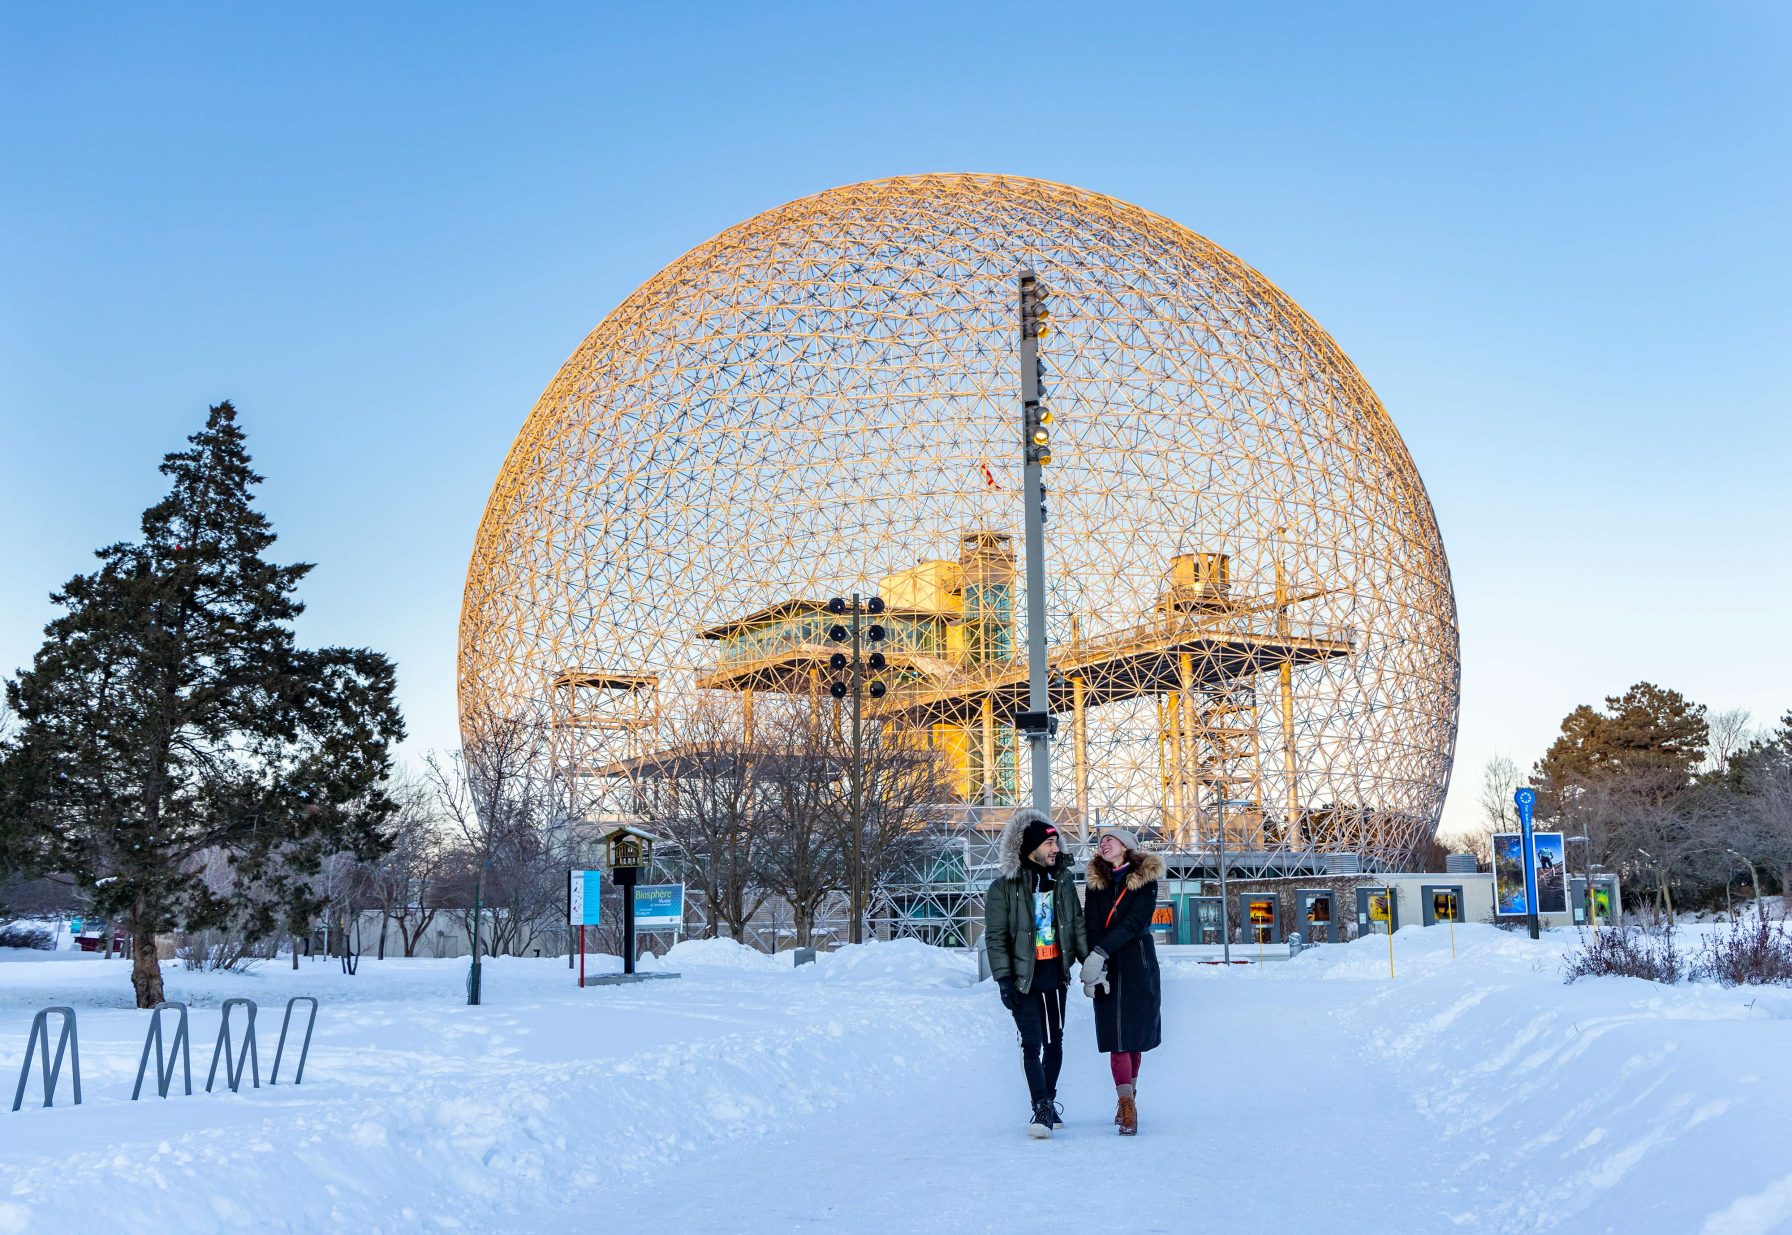 Biosphère with two people during the winter